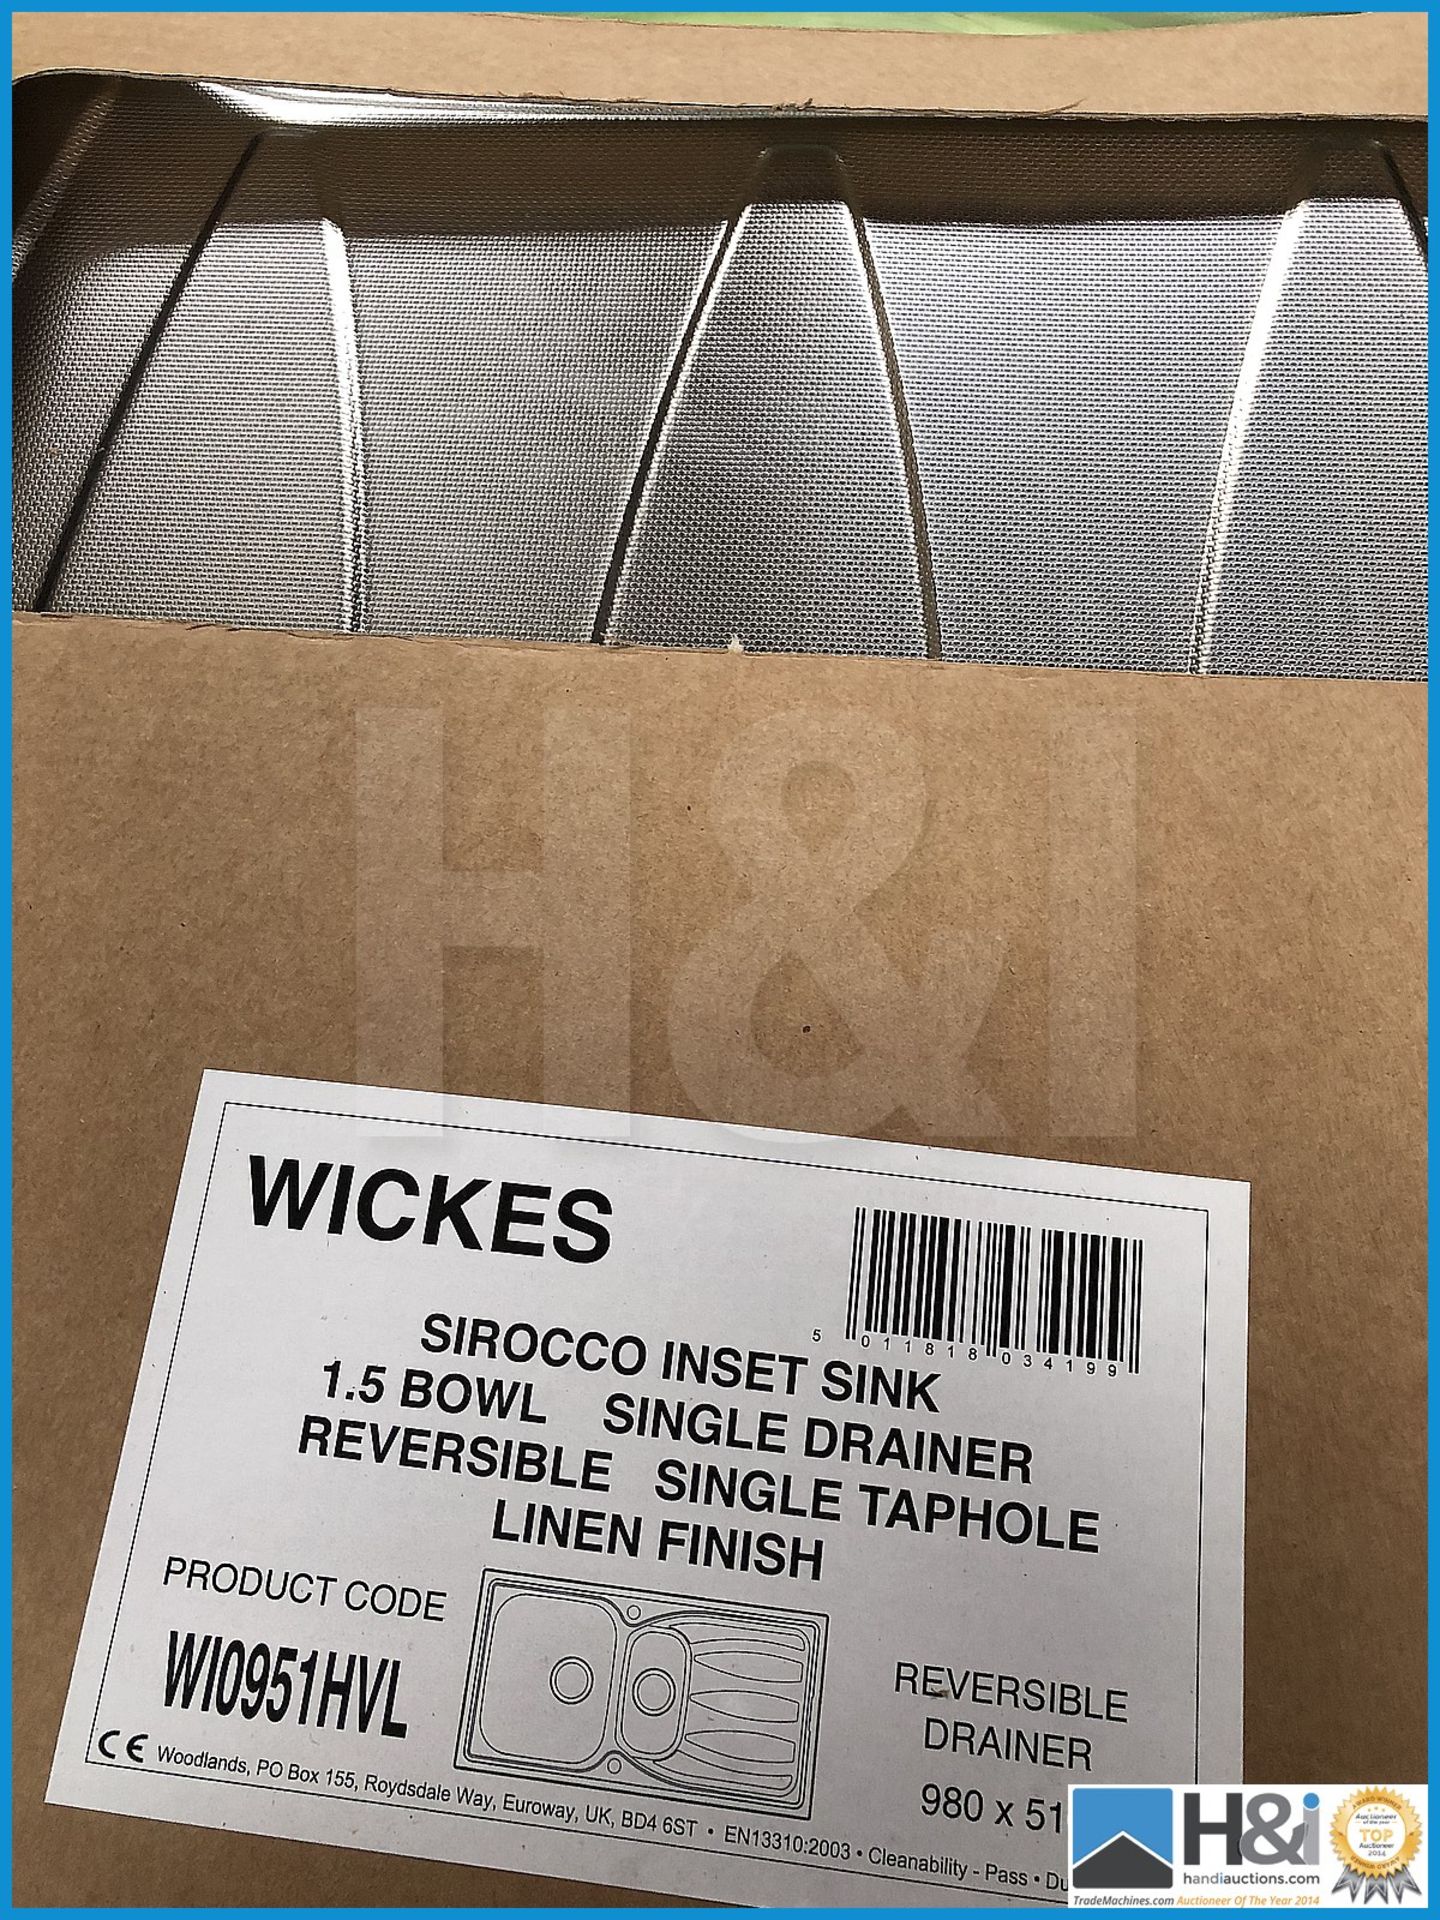 Wickes Sirocco insert sink 1.5 bowl single drainer reversible single tap hole stainless linen textur - Image 2 of 2